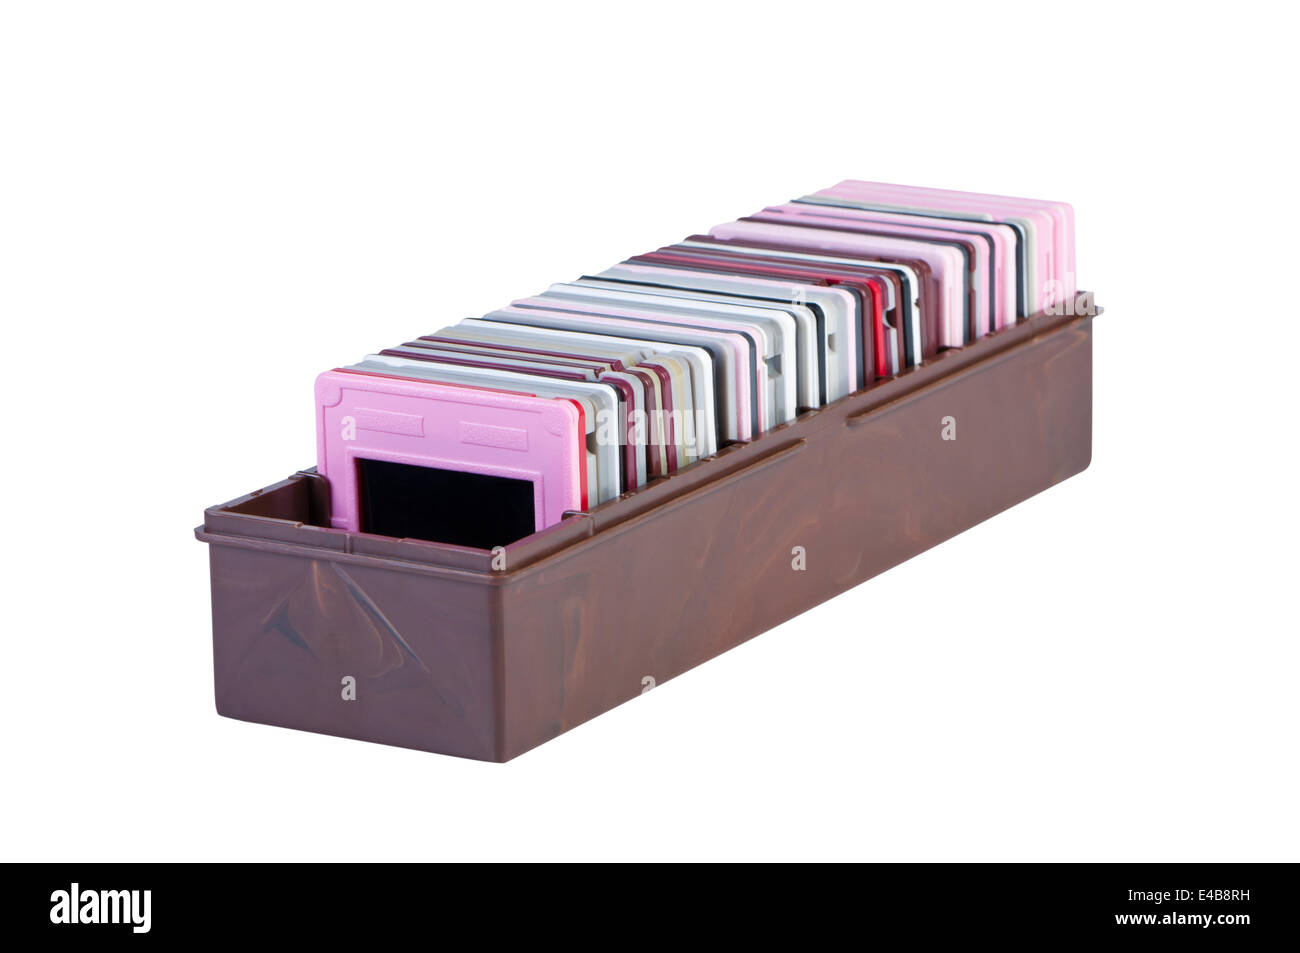 Box with slides. Stock Photo